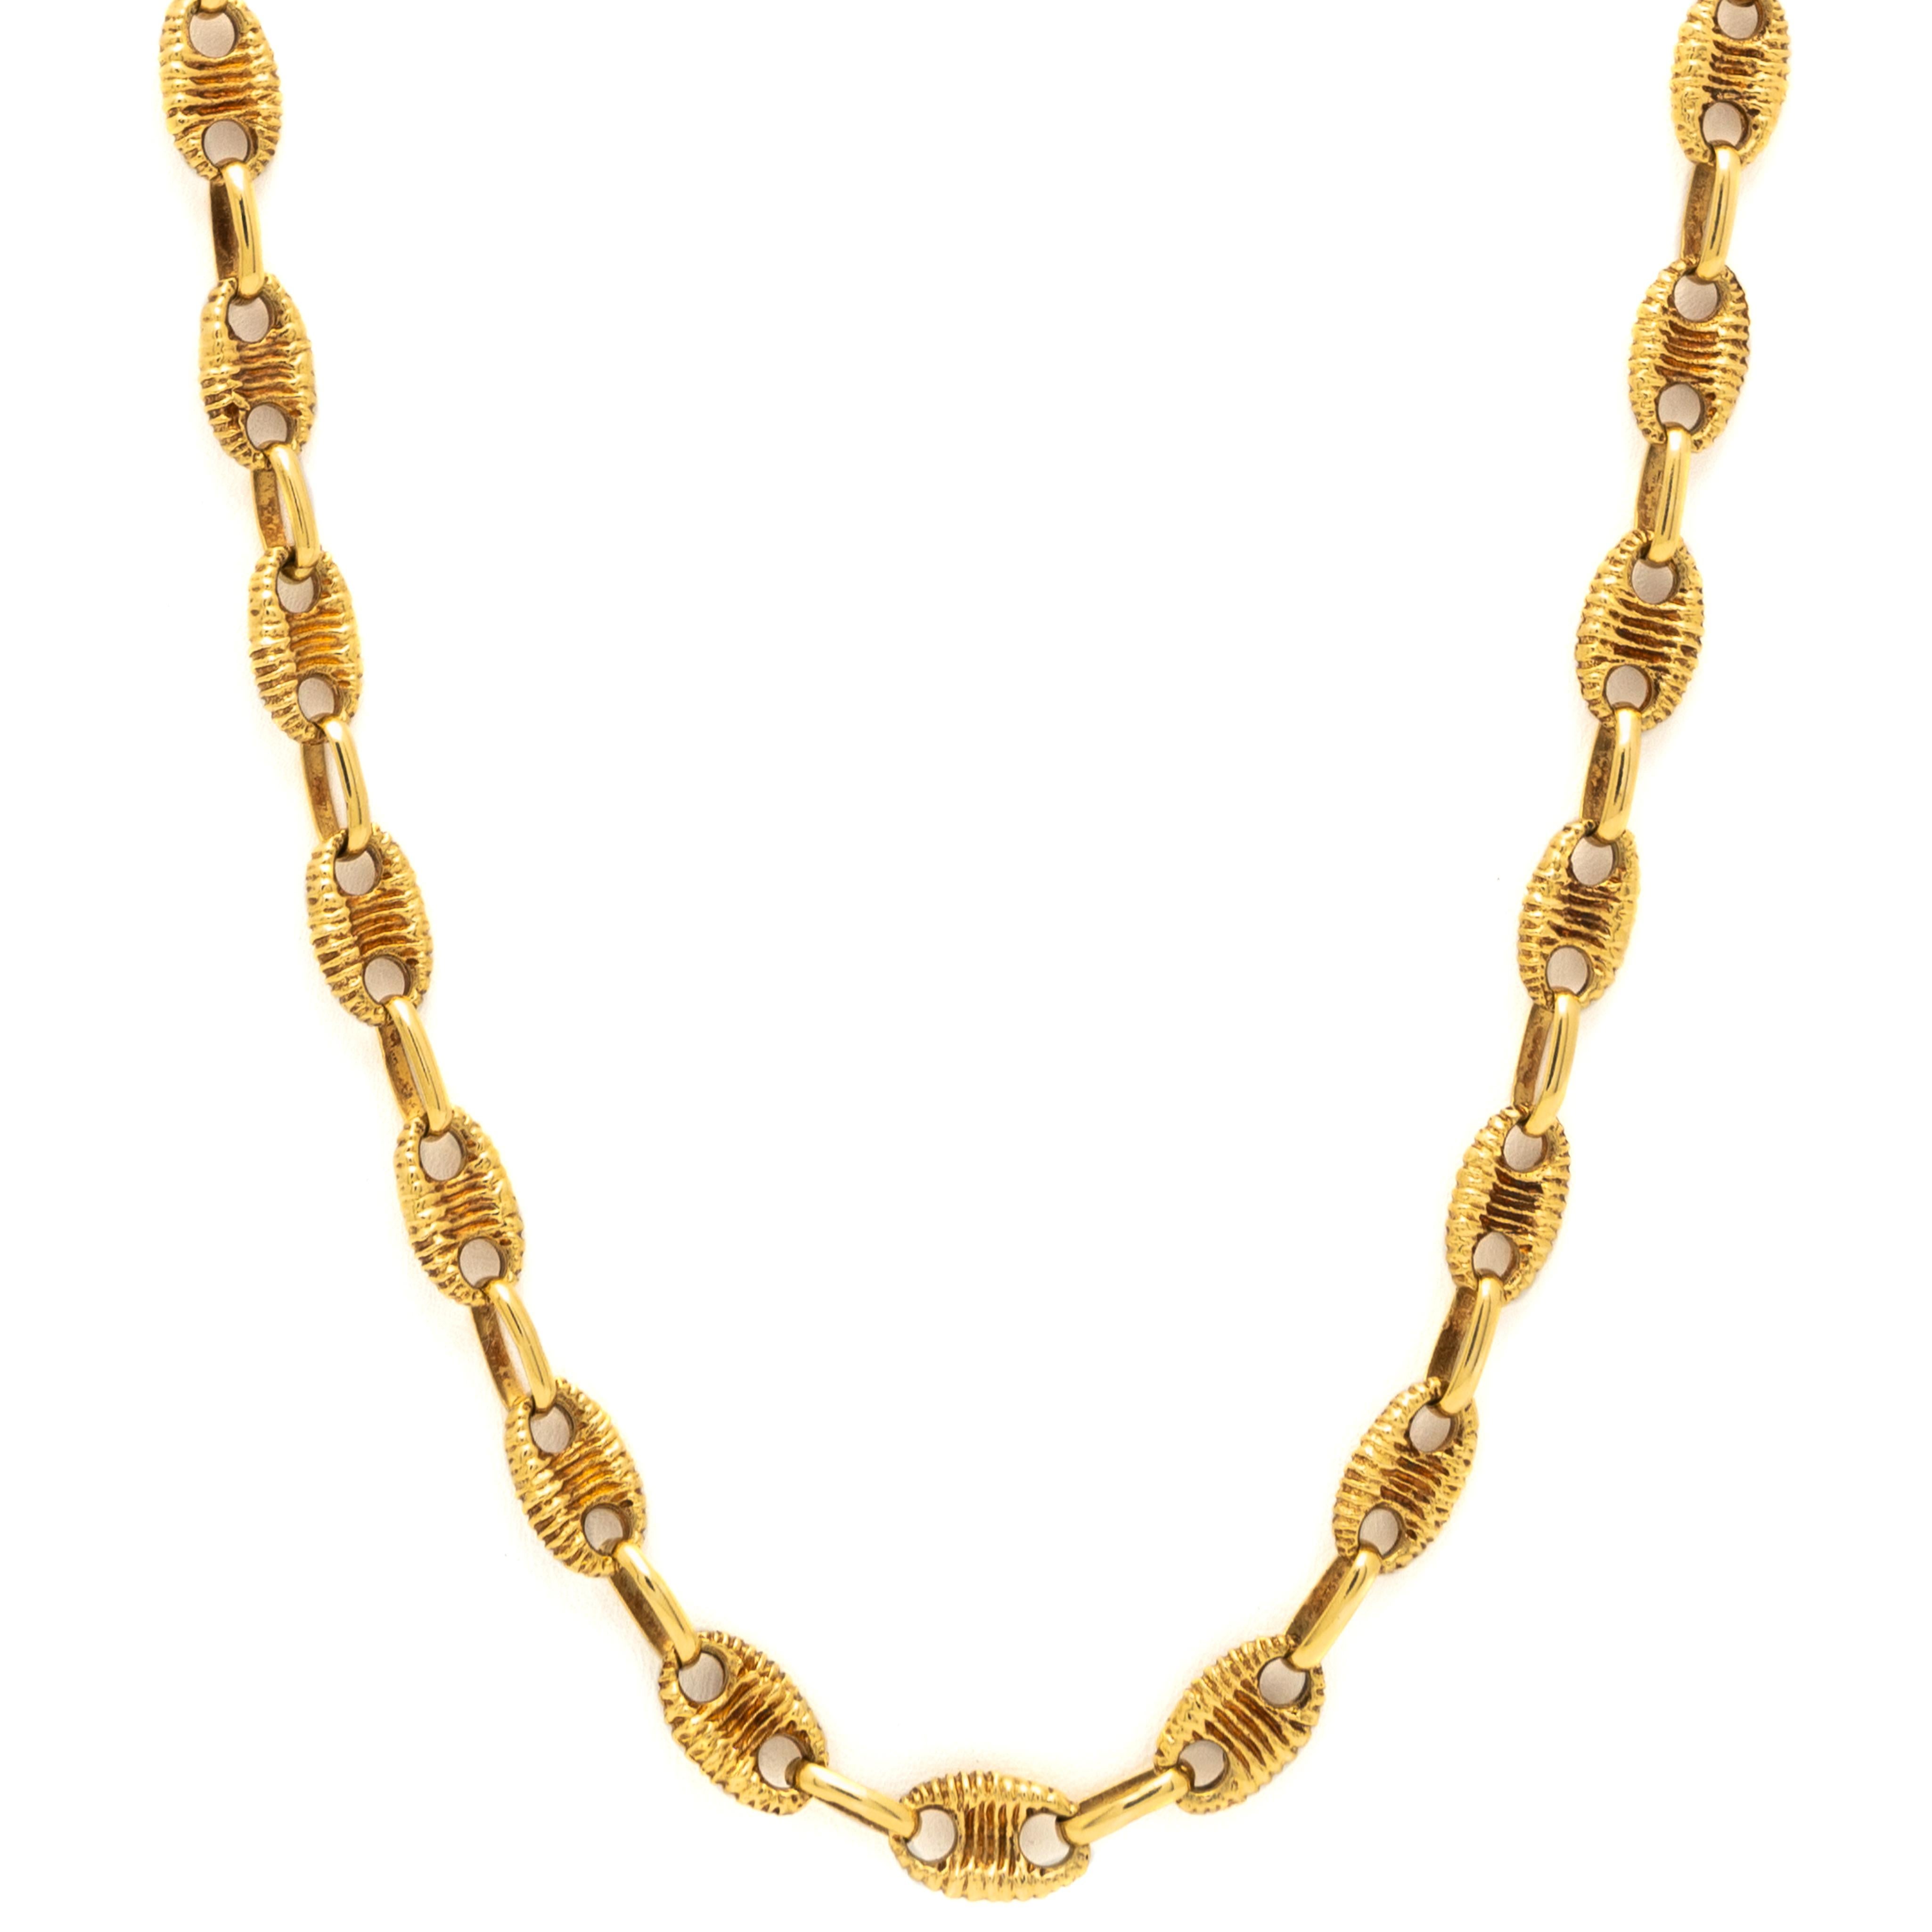 Vintage 18K Yellow Gold Textured Marine Link Chain c.1970s

Period: Vintage
Year: c.1970s
Material: 18k Yellow Gold 
Weight: 35.48g
Length: 24 inches
Width: 5.87mm at Widest Point
Condition: Excellent